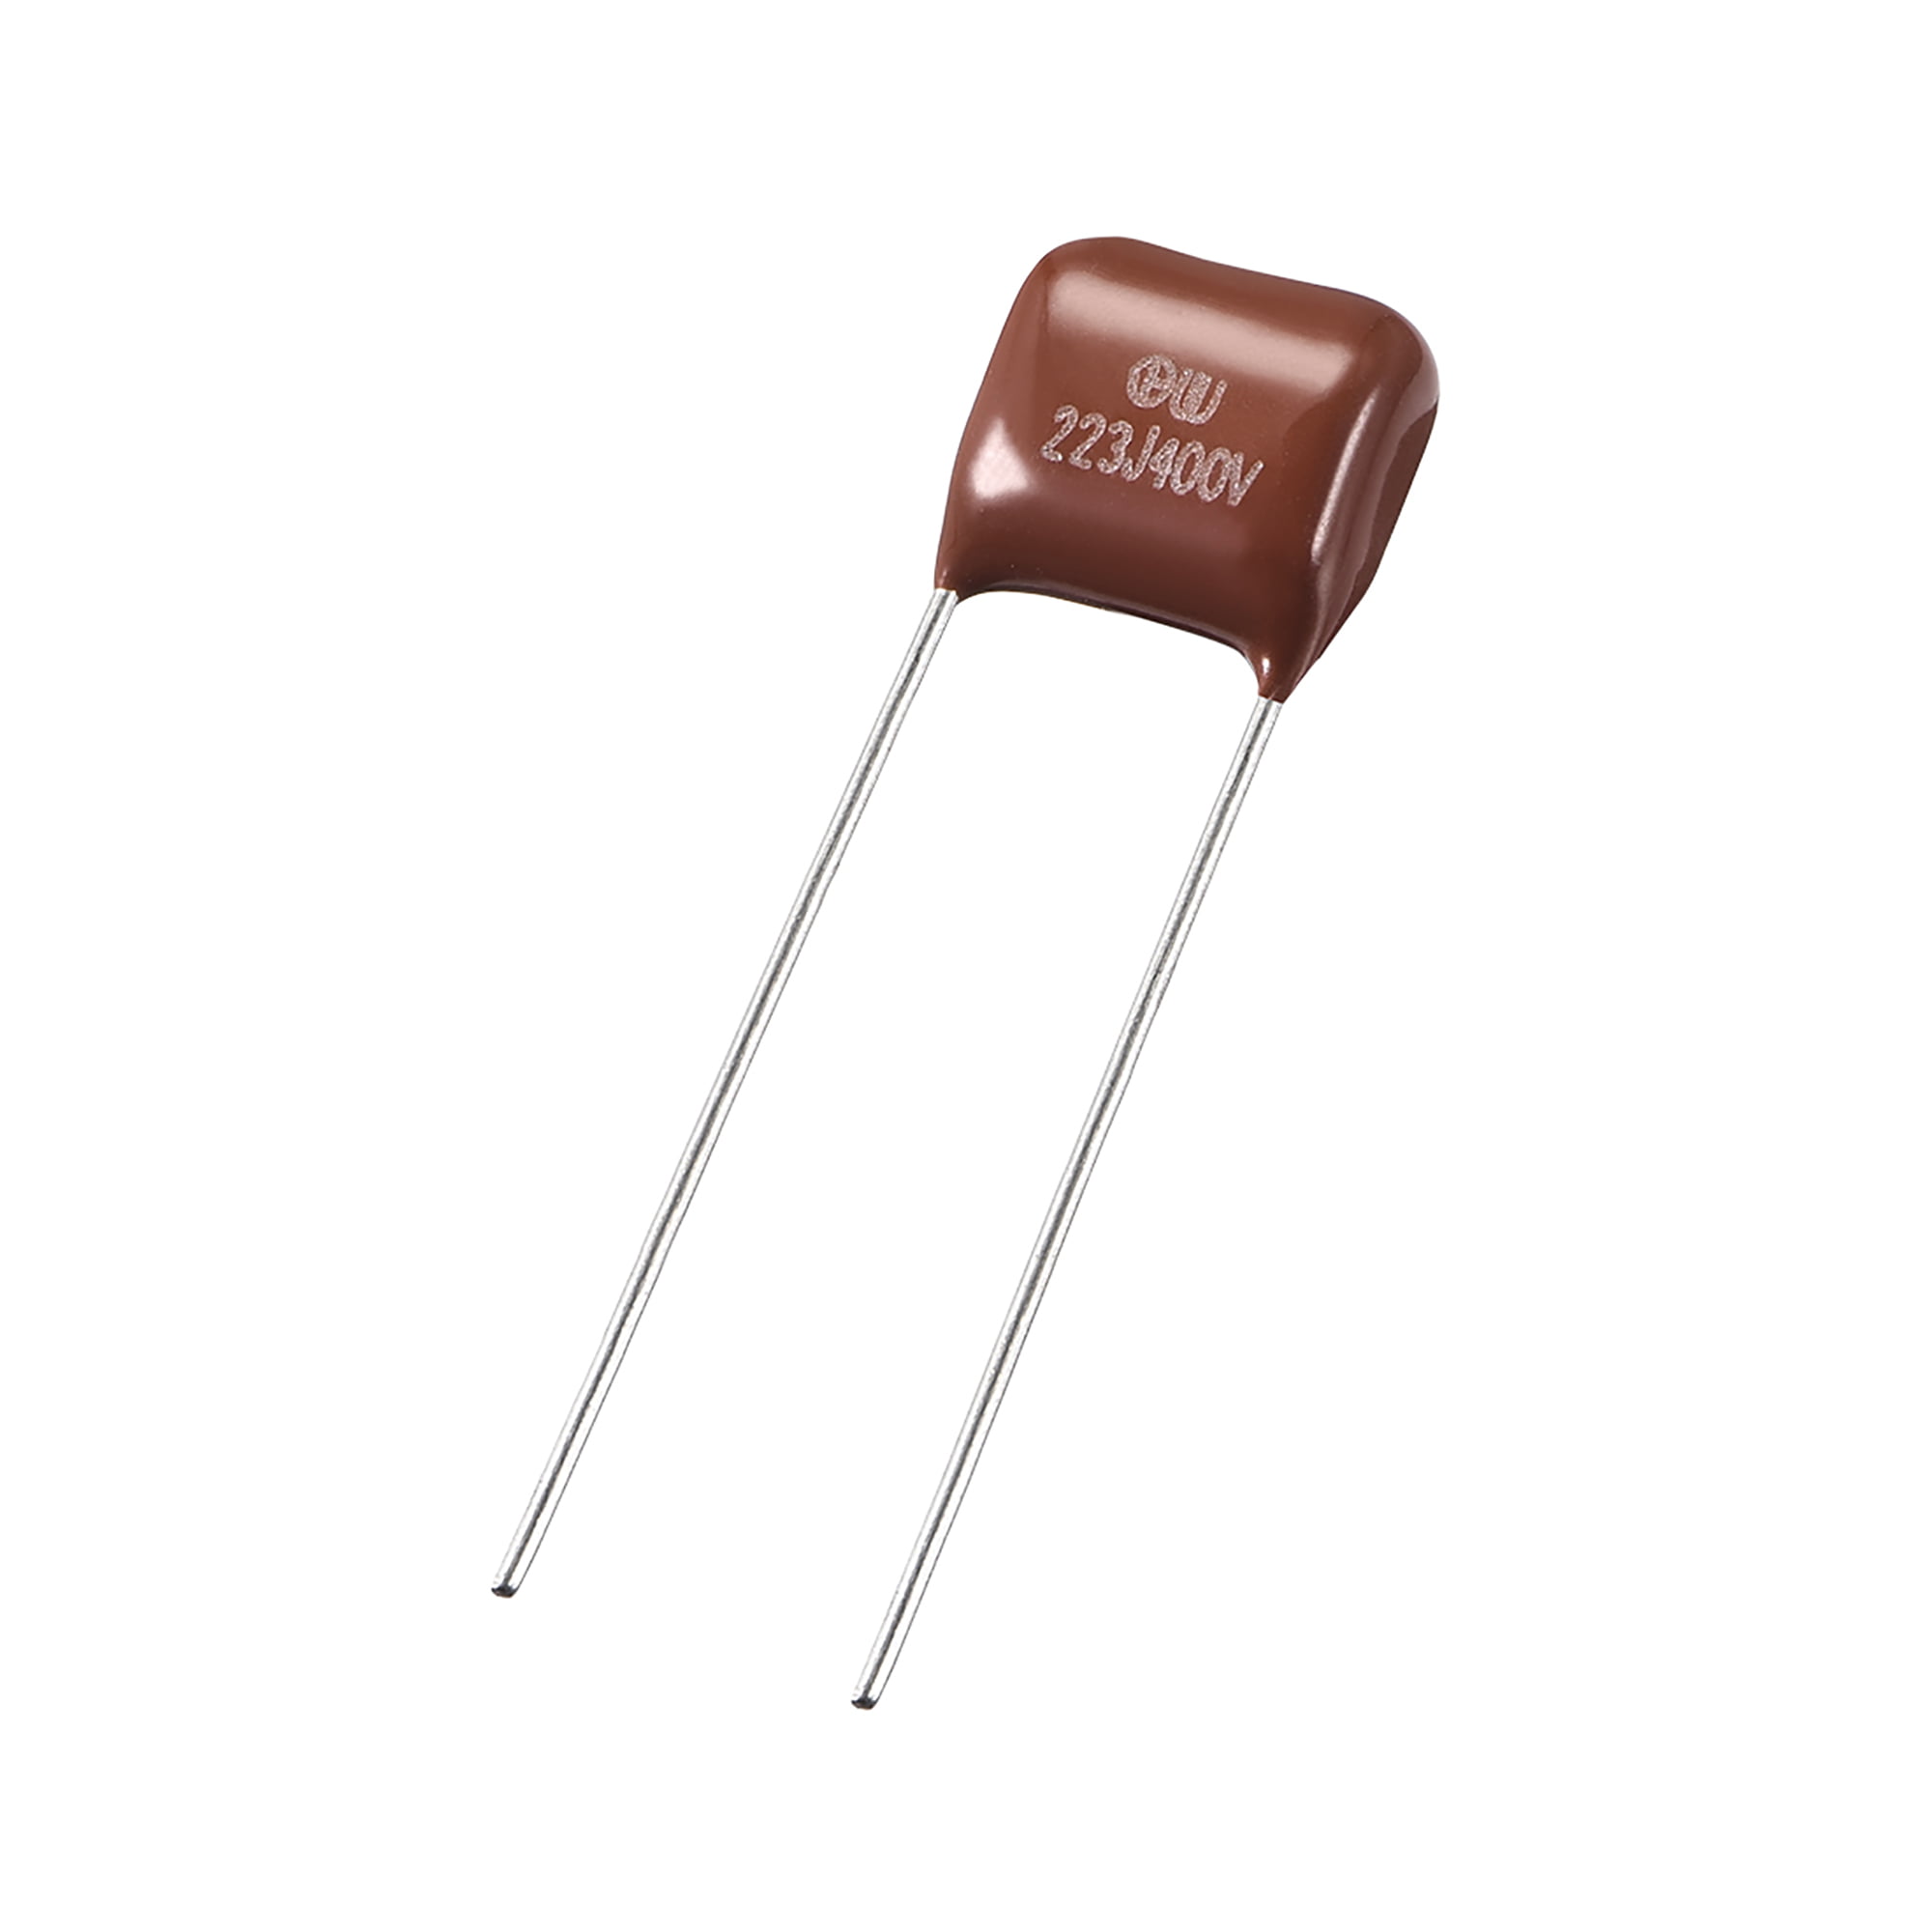 uxcell CBB21 Metallized Polypropylene Film Capacitors 400V 0.22uF for Electric Circuits Energy Saving Lamps Pack of 10